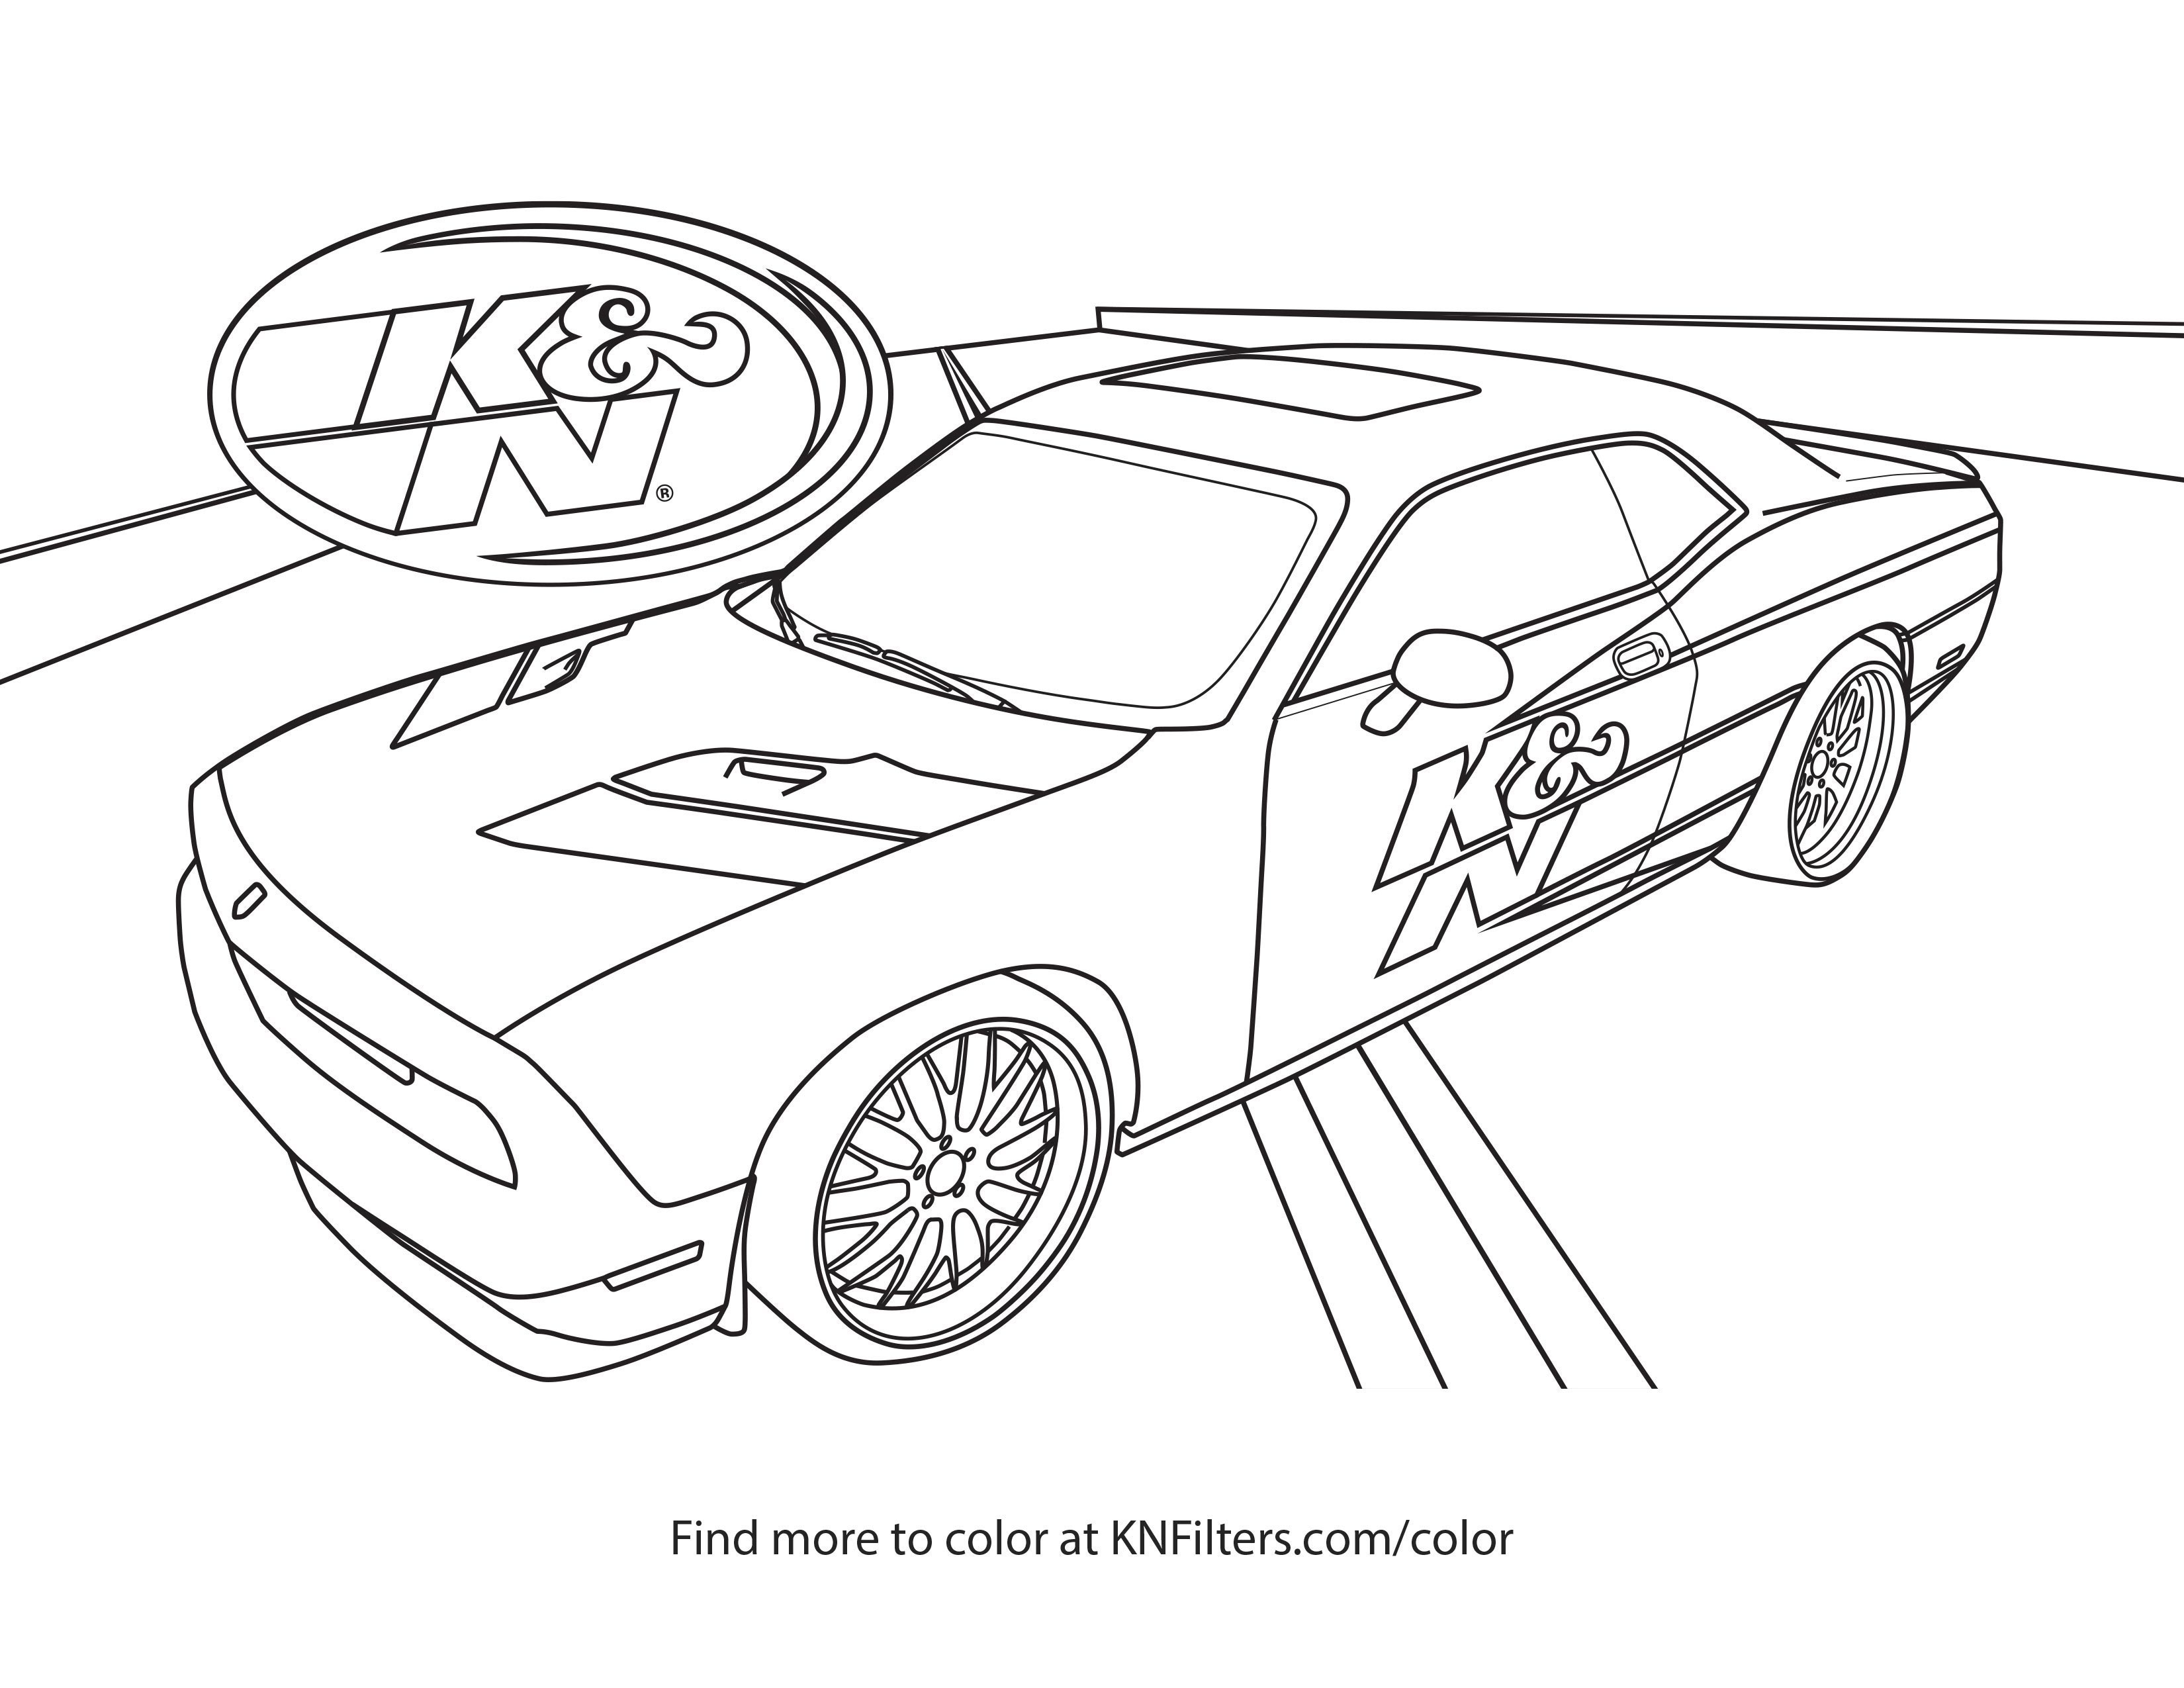 3300x2550 Dodge Challenger Coloring Pages To Print Free Coloring Books - Do...